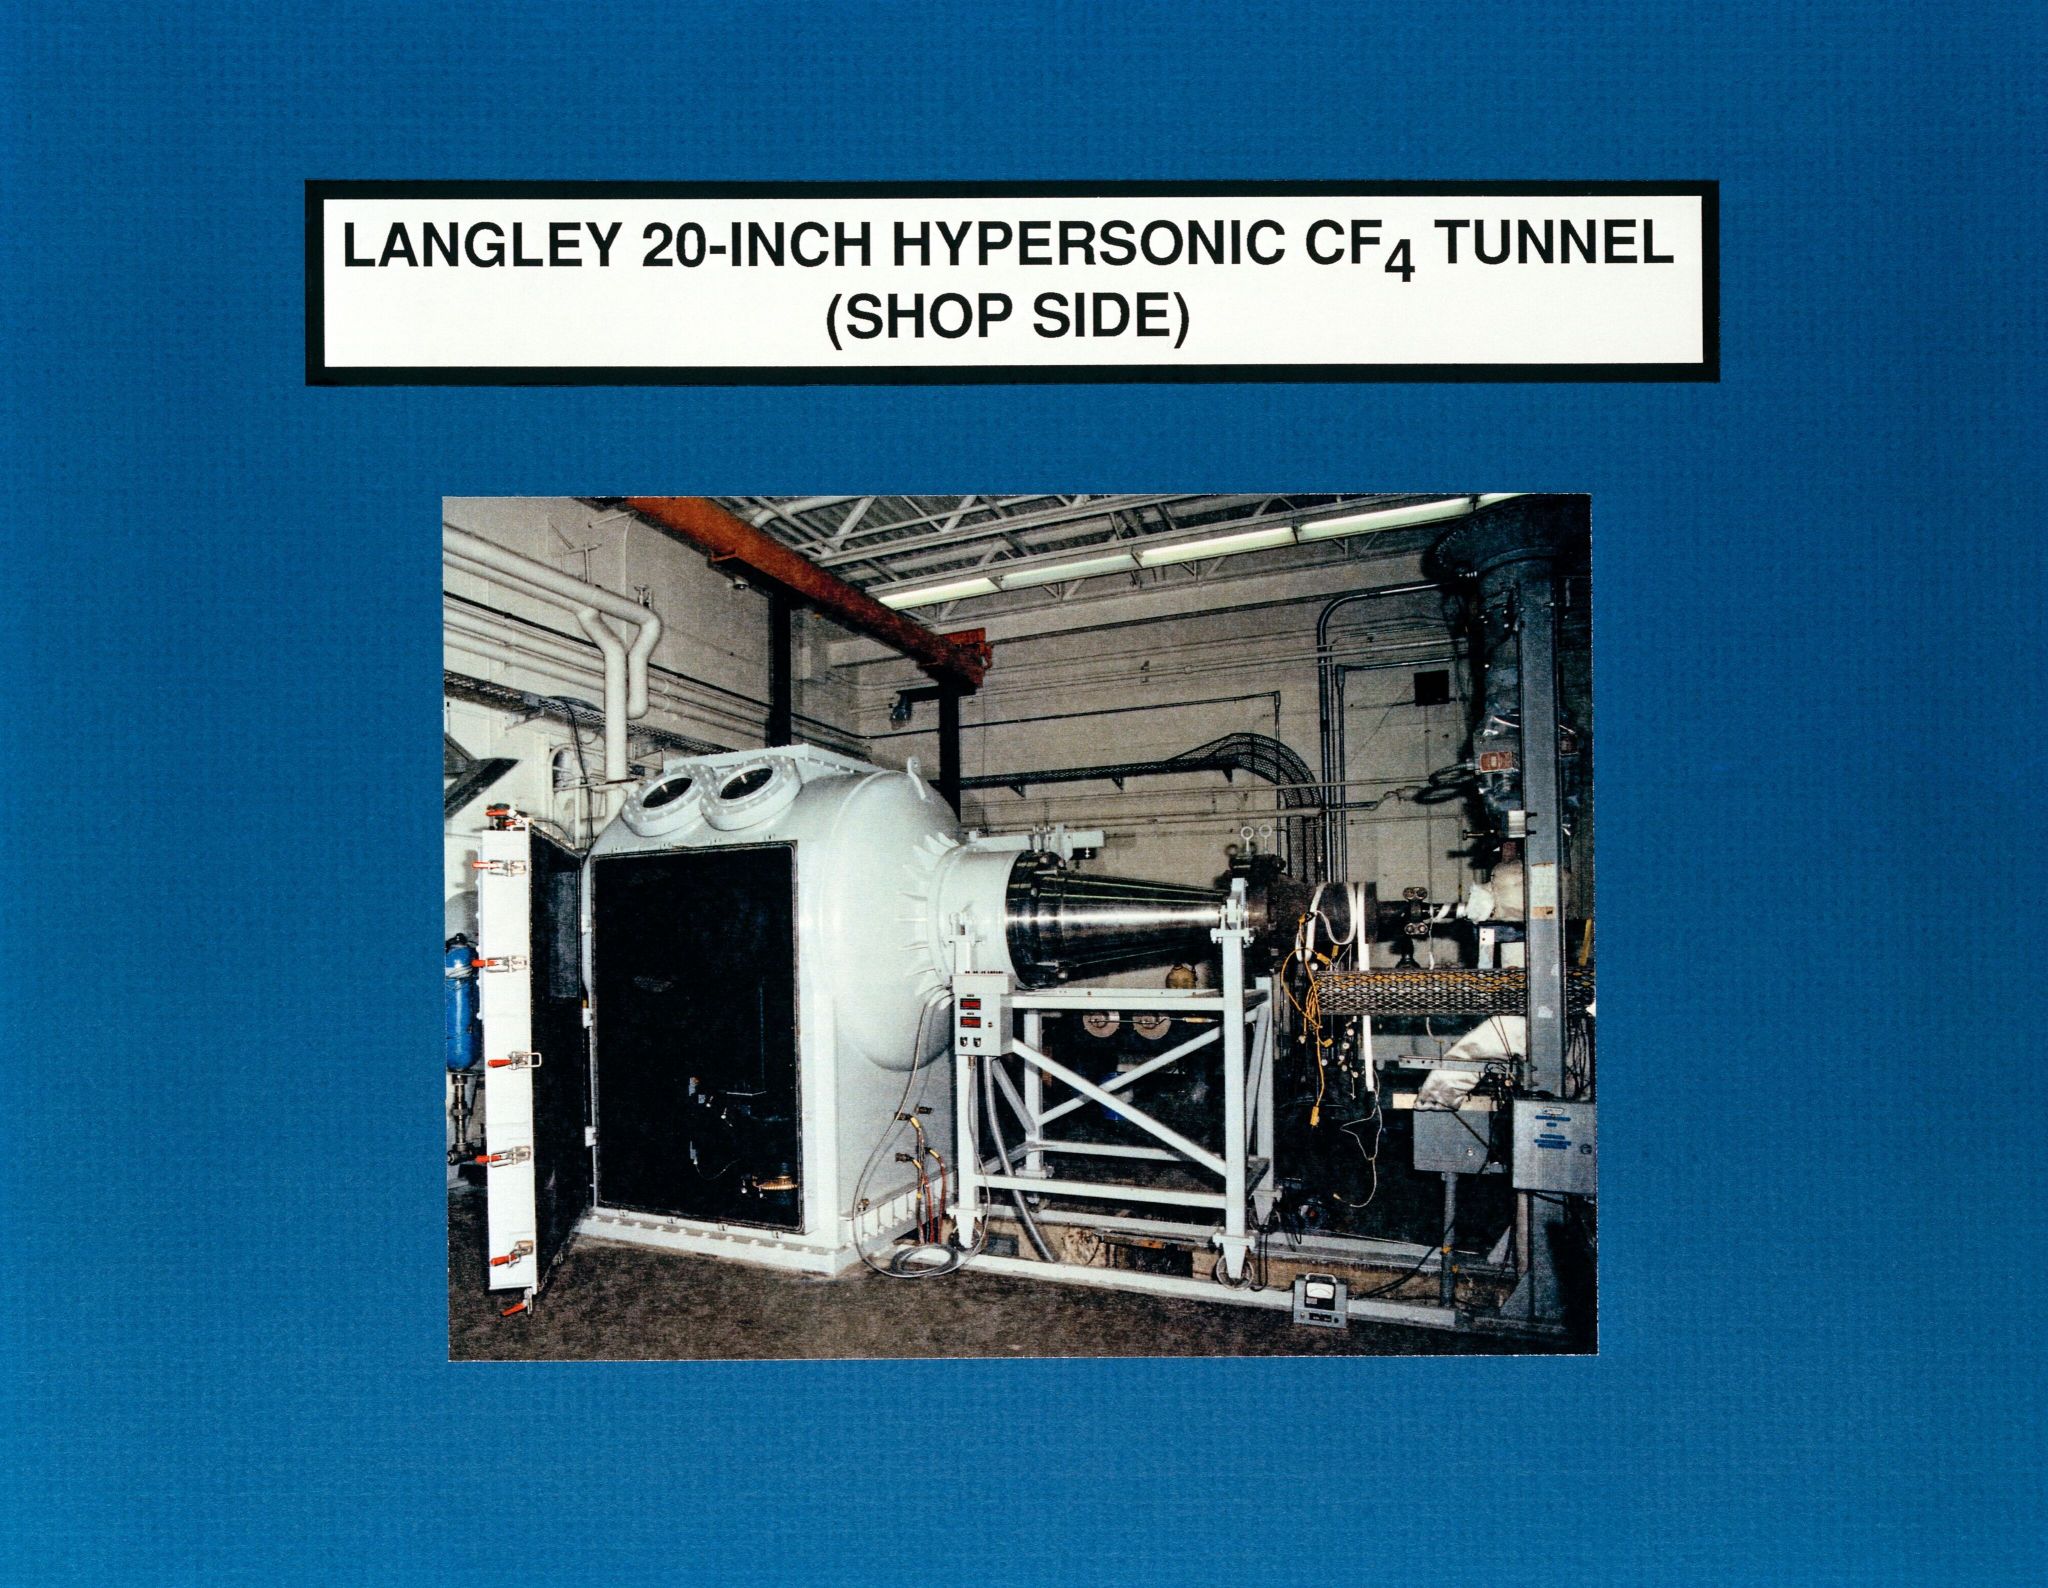 An image of the Langley 20-inch hypersonic CF4 tunnel (shop side). 